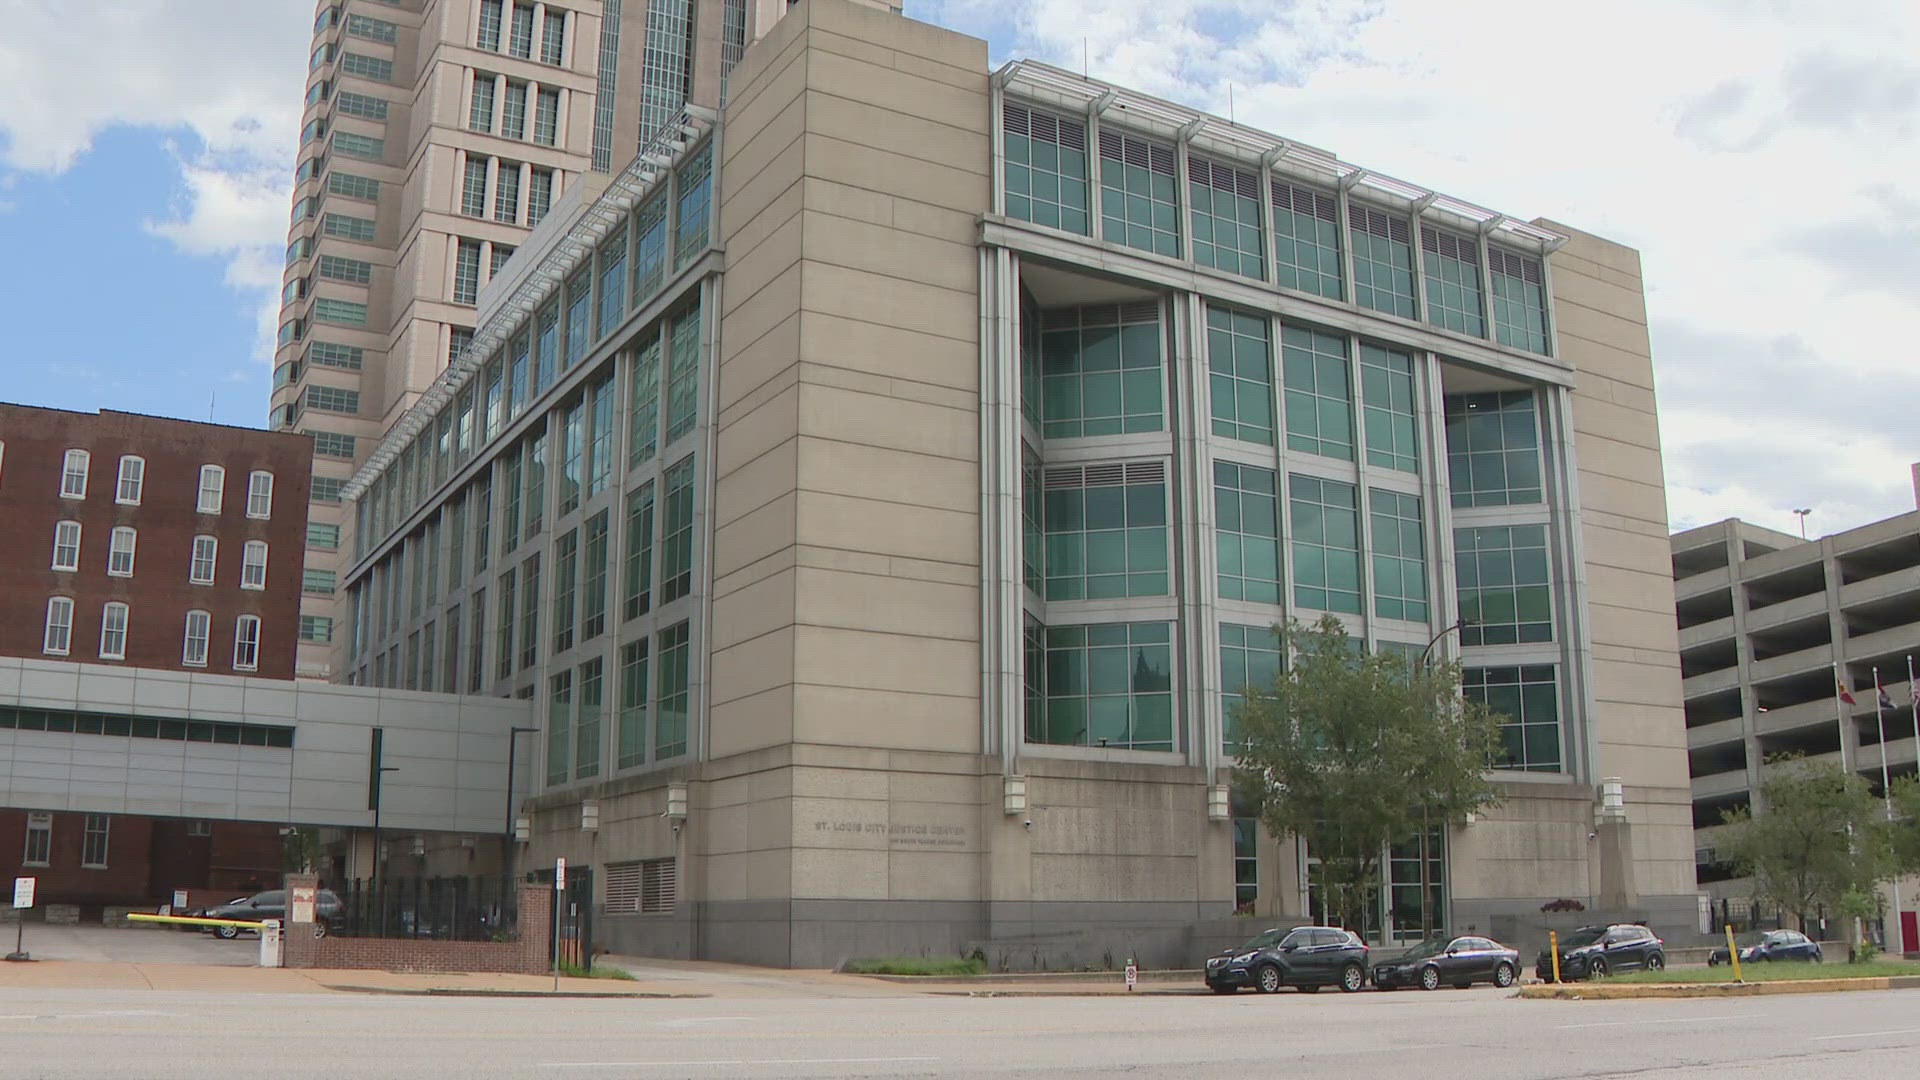 After roughly 18 months of existence, the St. Louis Detention Facilities Oversight Board was able to get inside the St. Louis City Justice Center for the first time.